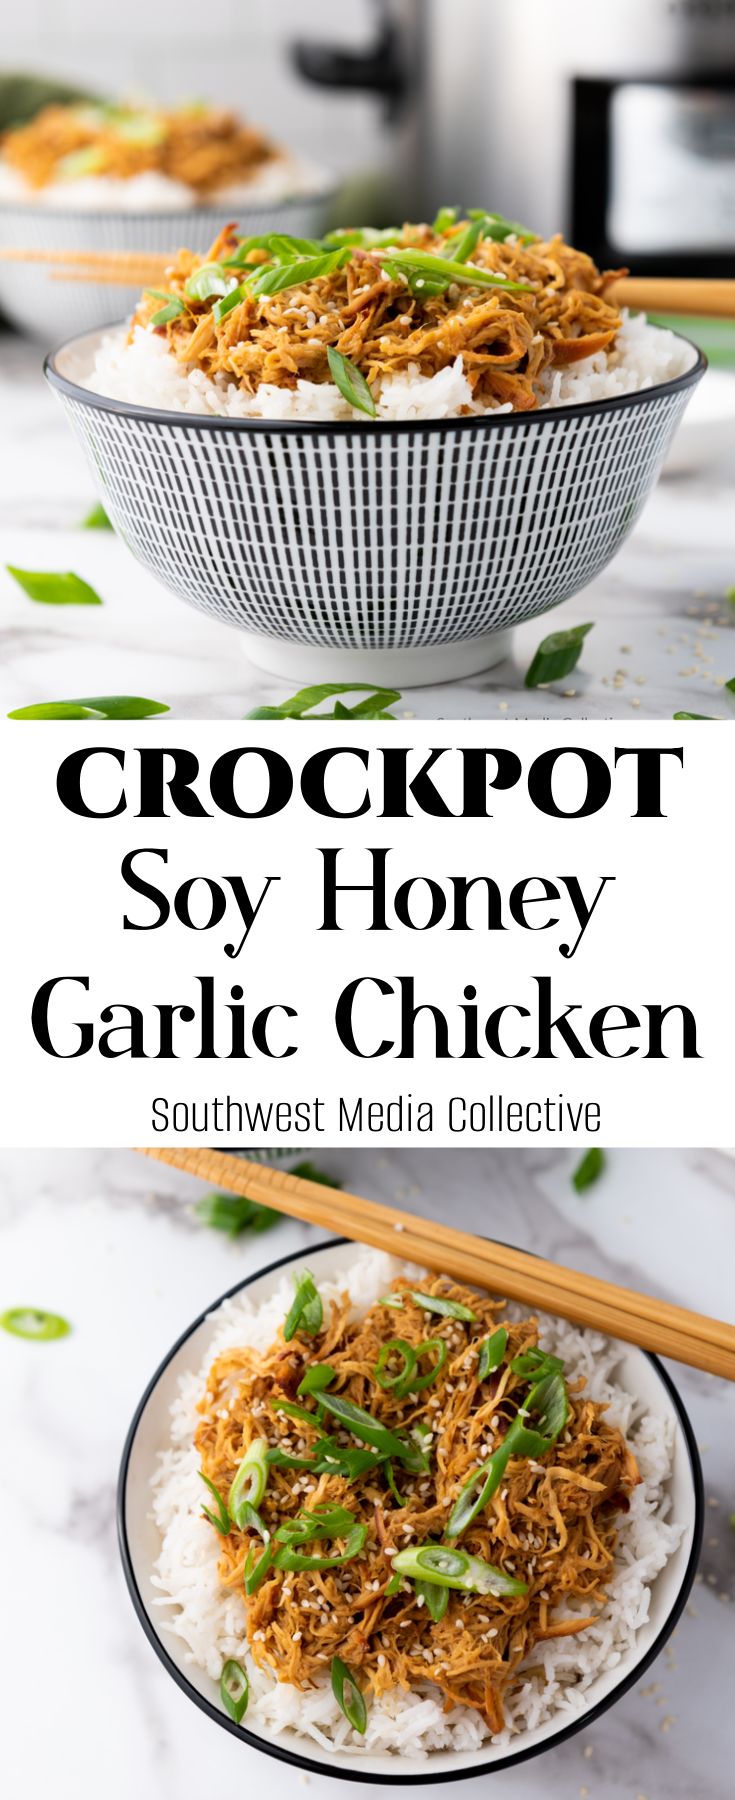 Crockpot Slow Cooker Soy Honey Garlic Chicken - simple, delicious and perfect topped on rice for a beautiful family meal!